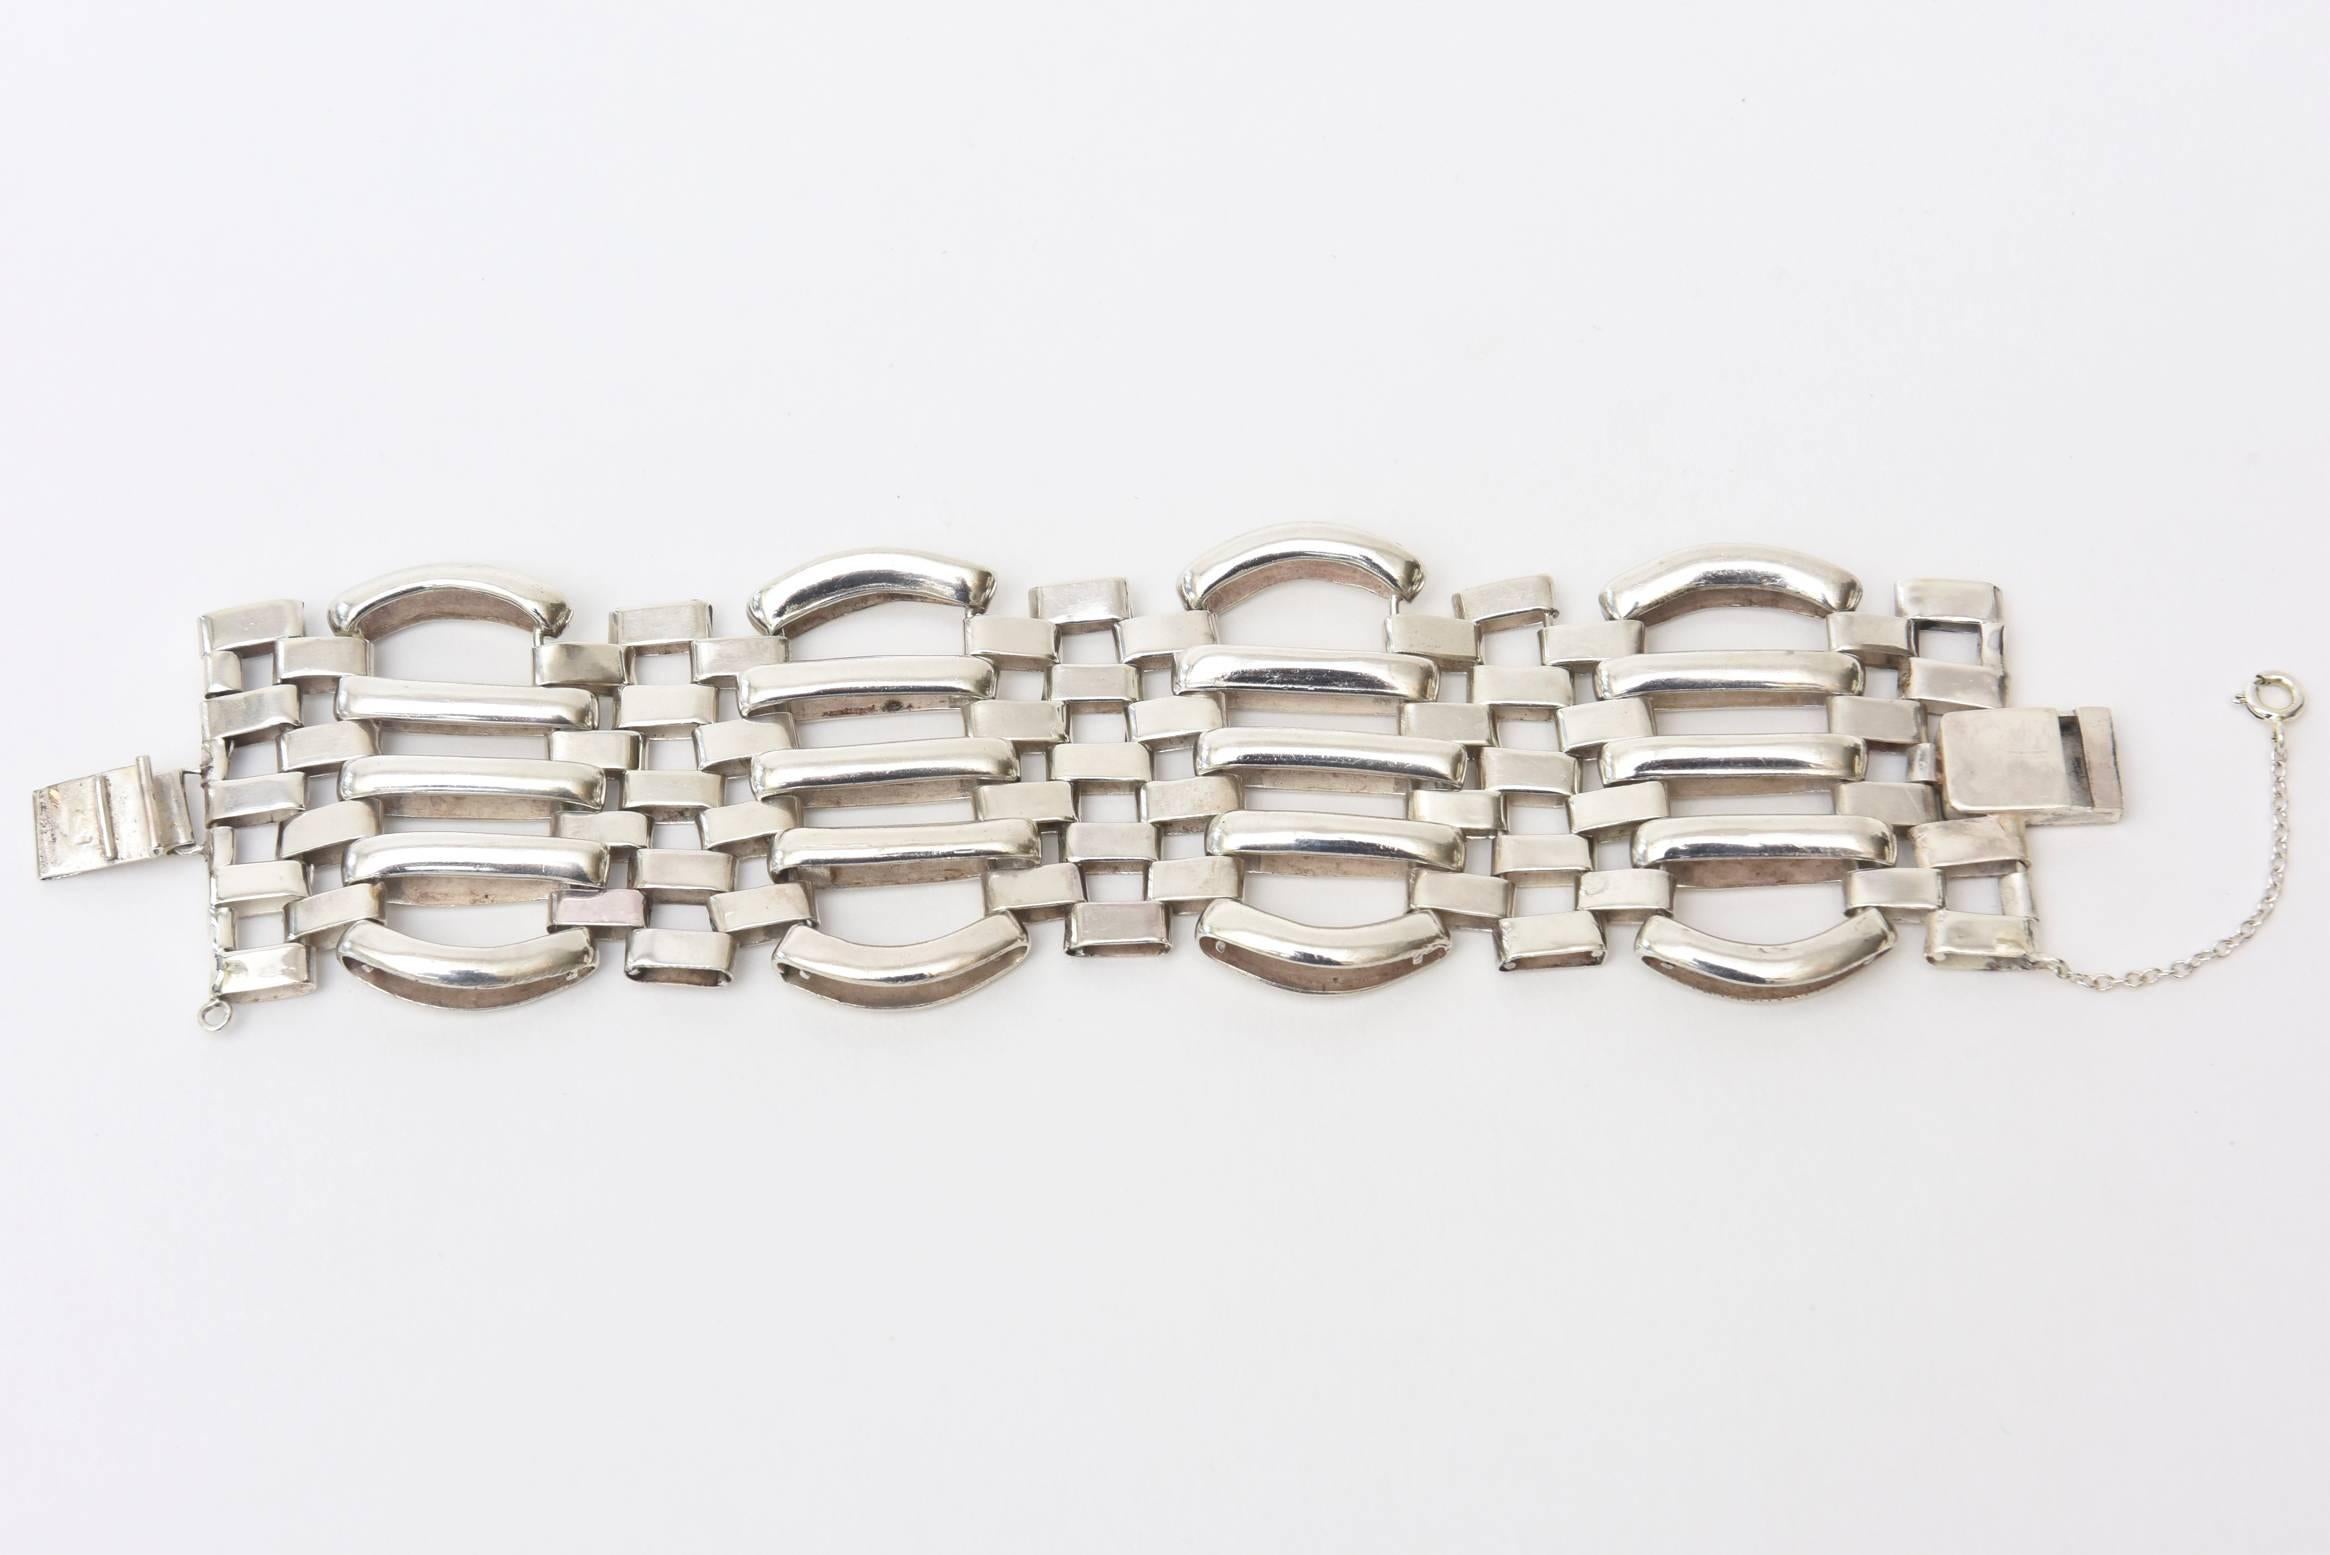 This wonderful vintage sterling silver cuff bracelet has great weight to it. It is modernist, minimalist and sculptural all at the same time. It fits beautifully on the wrist. The linear links of different sizes and forms add to the modernist look.